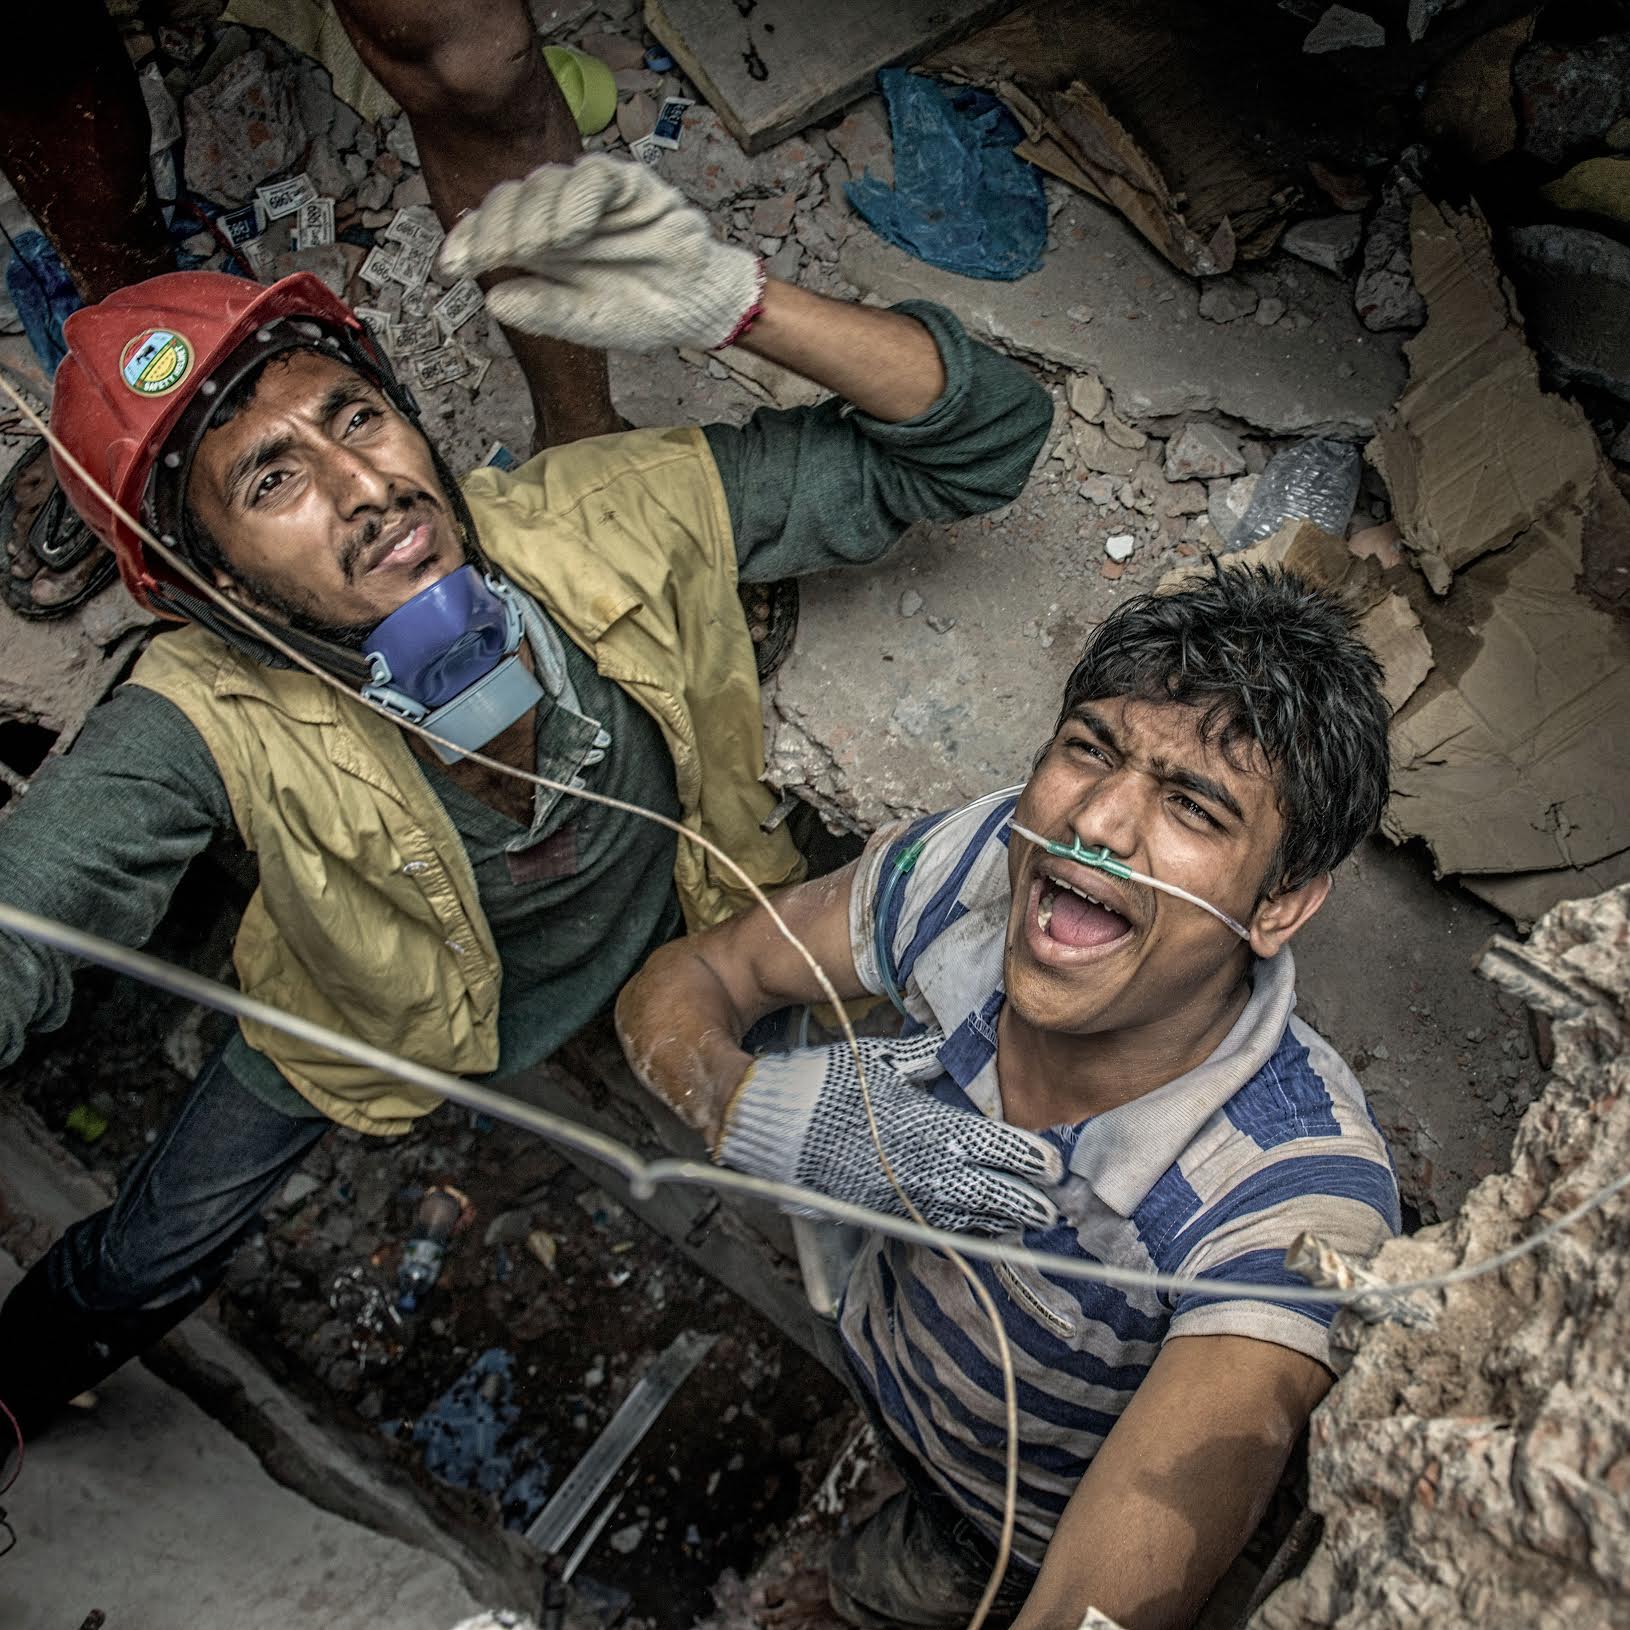 Mobarak Hossain worked as a volunteer for more than a month after the building collapsed to rescue victims from the rubble and provide relief.